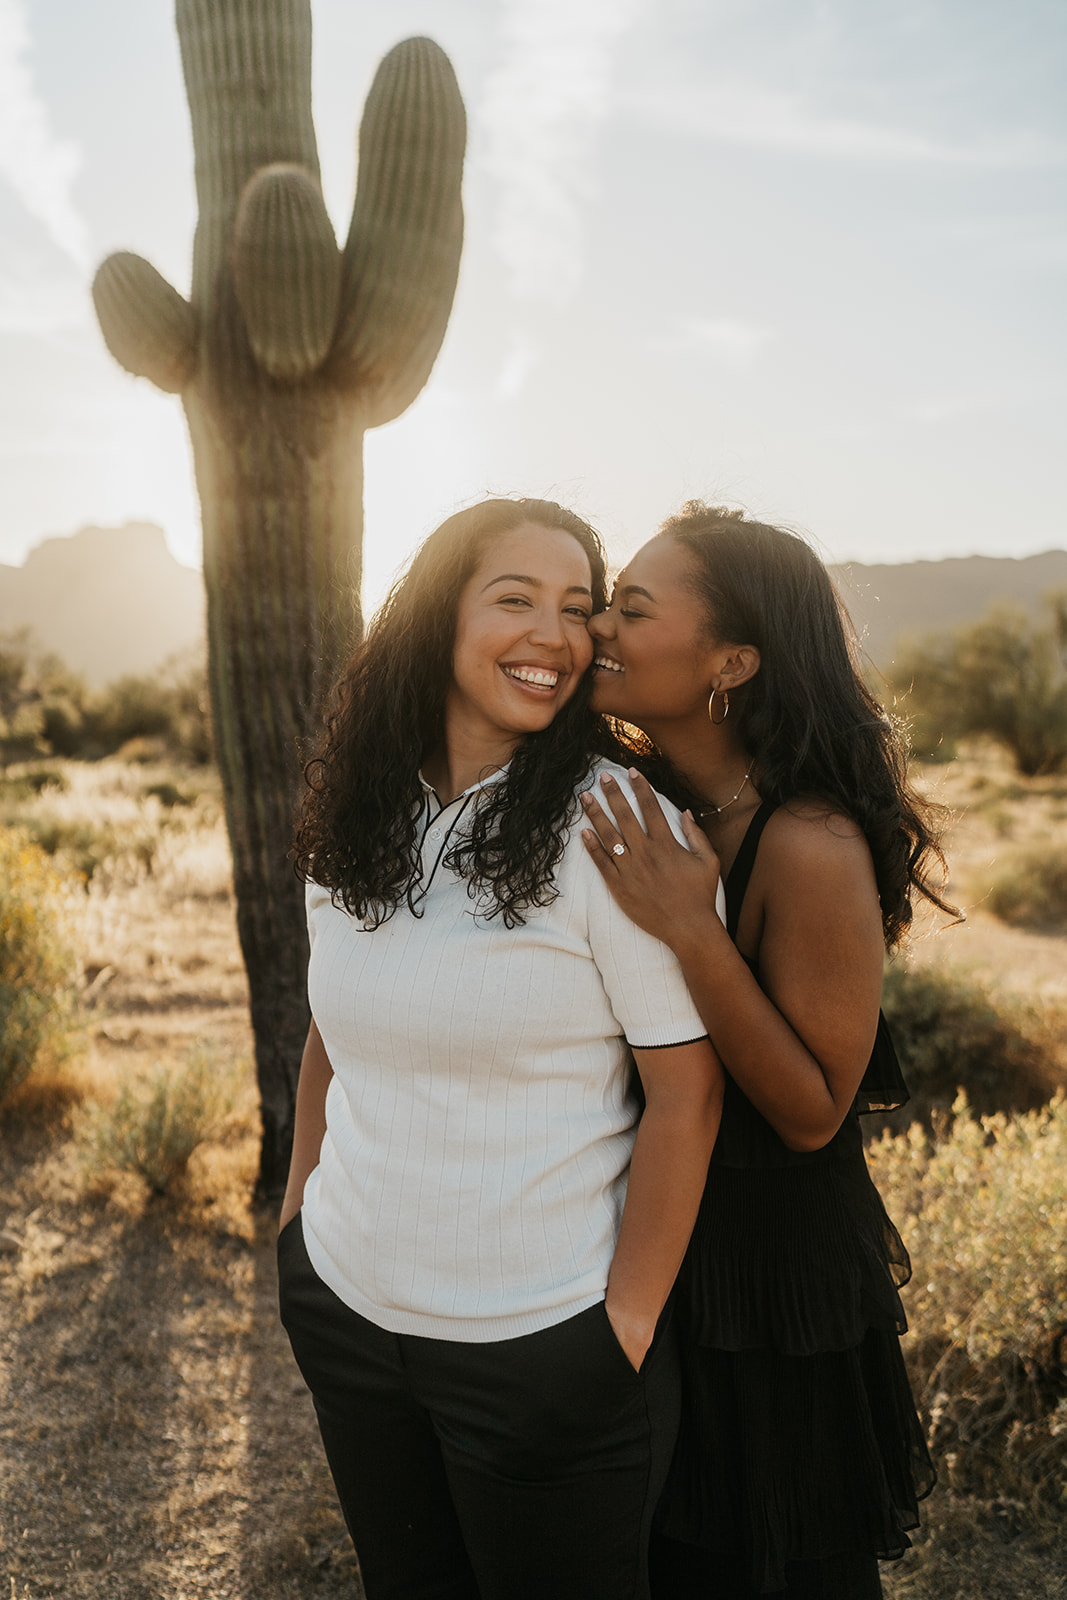 Two women standing in the desert with a cactus behind them. One is kissing the cheek of the other.